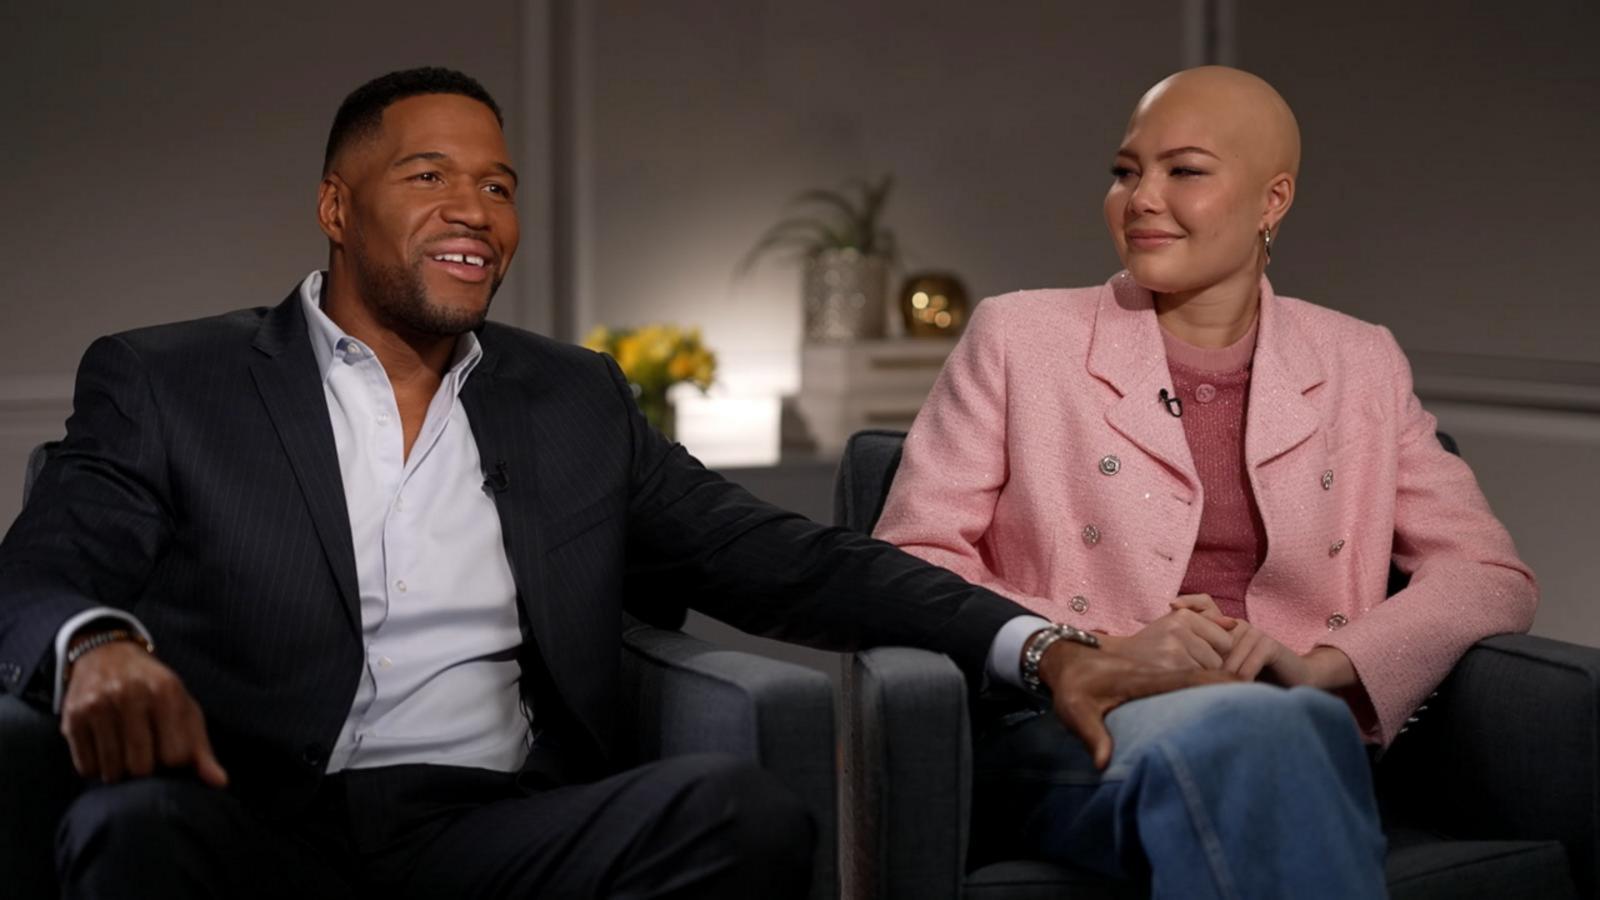 Michael Strahans Daughter Opens Up About Brain Cancer Battle Good Morning America 